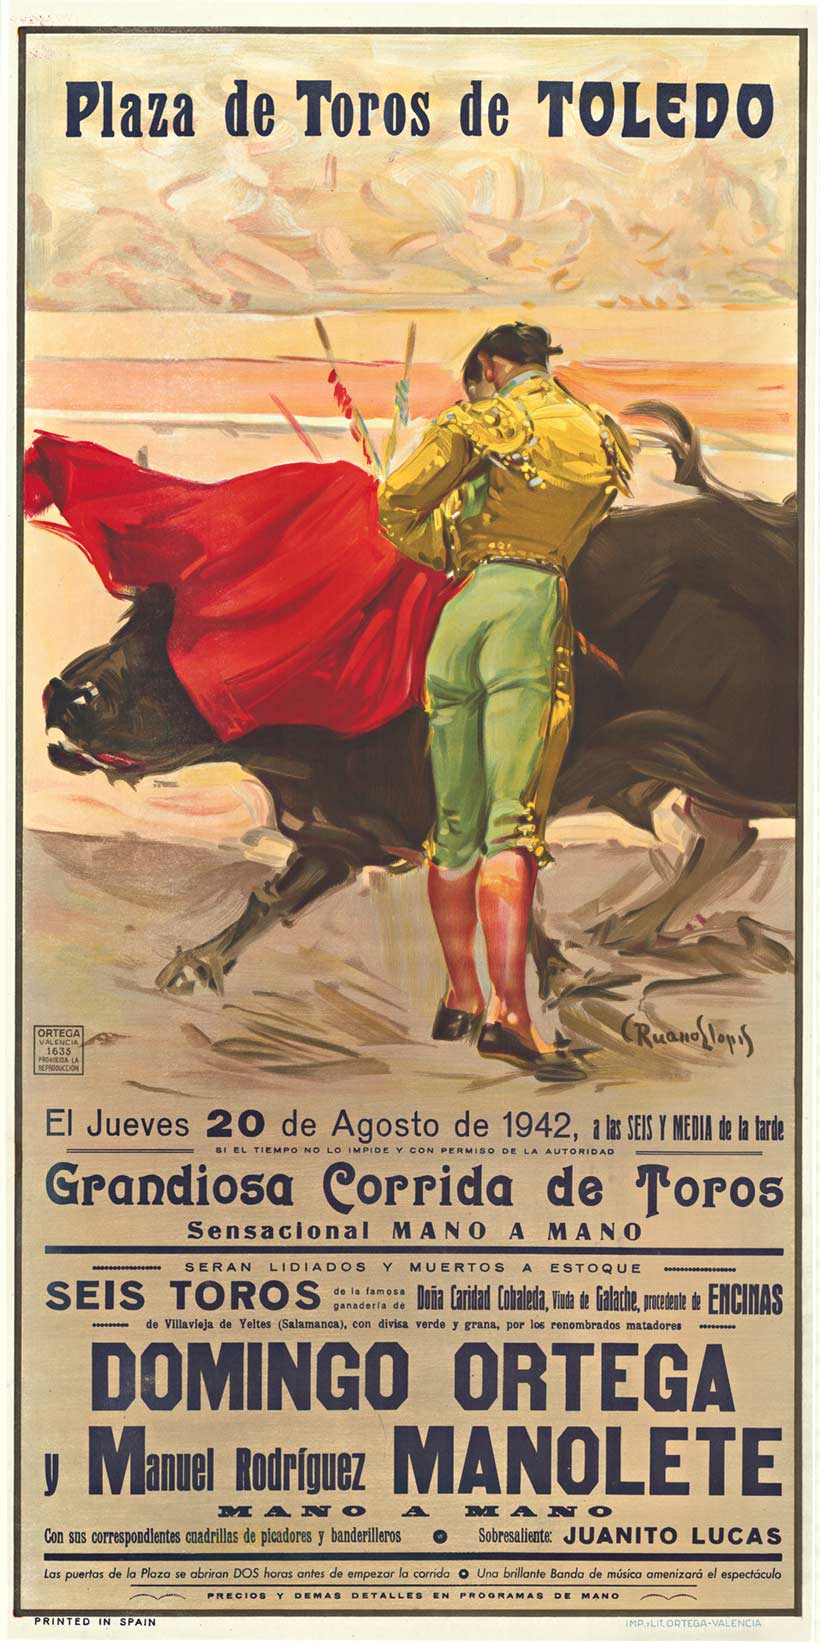 Travel and bullfighting posters printed during World War II are scarce and almost impossible to find. In this event, Manuel Manolete was performing, making it more exceptional. This incredible 1942 World War 2 time frame bullfighting poster is for the